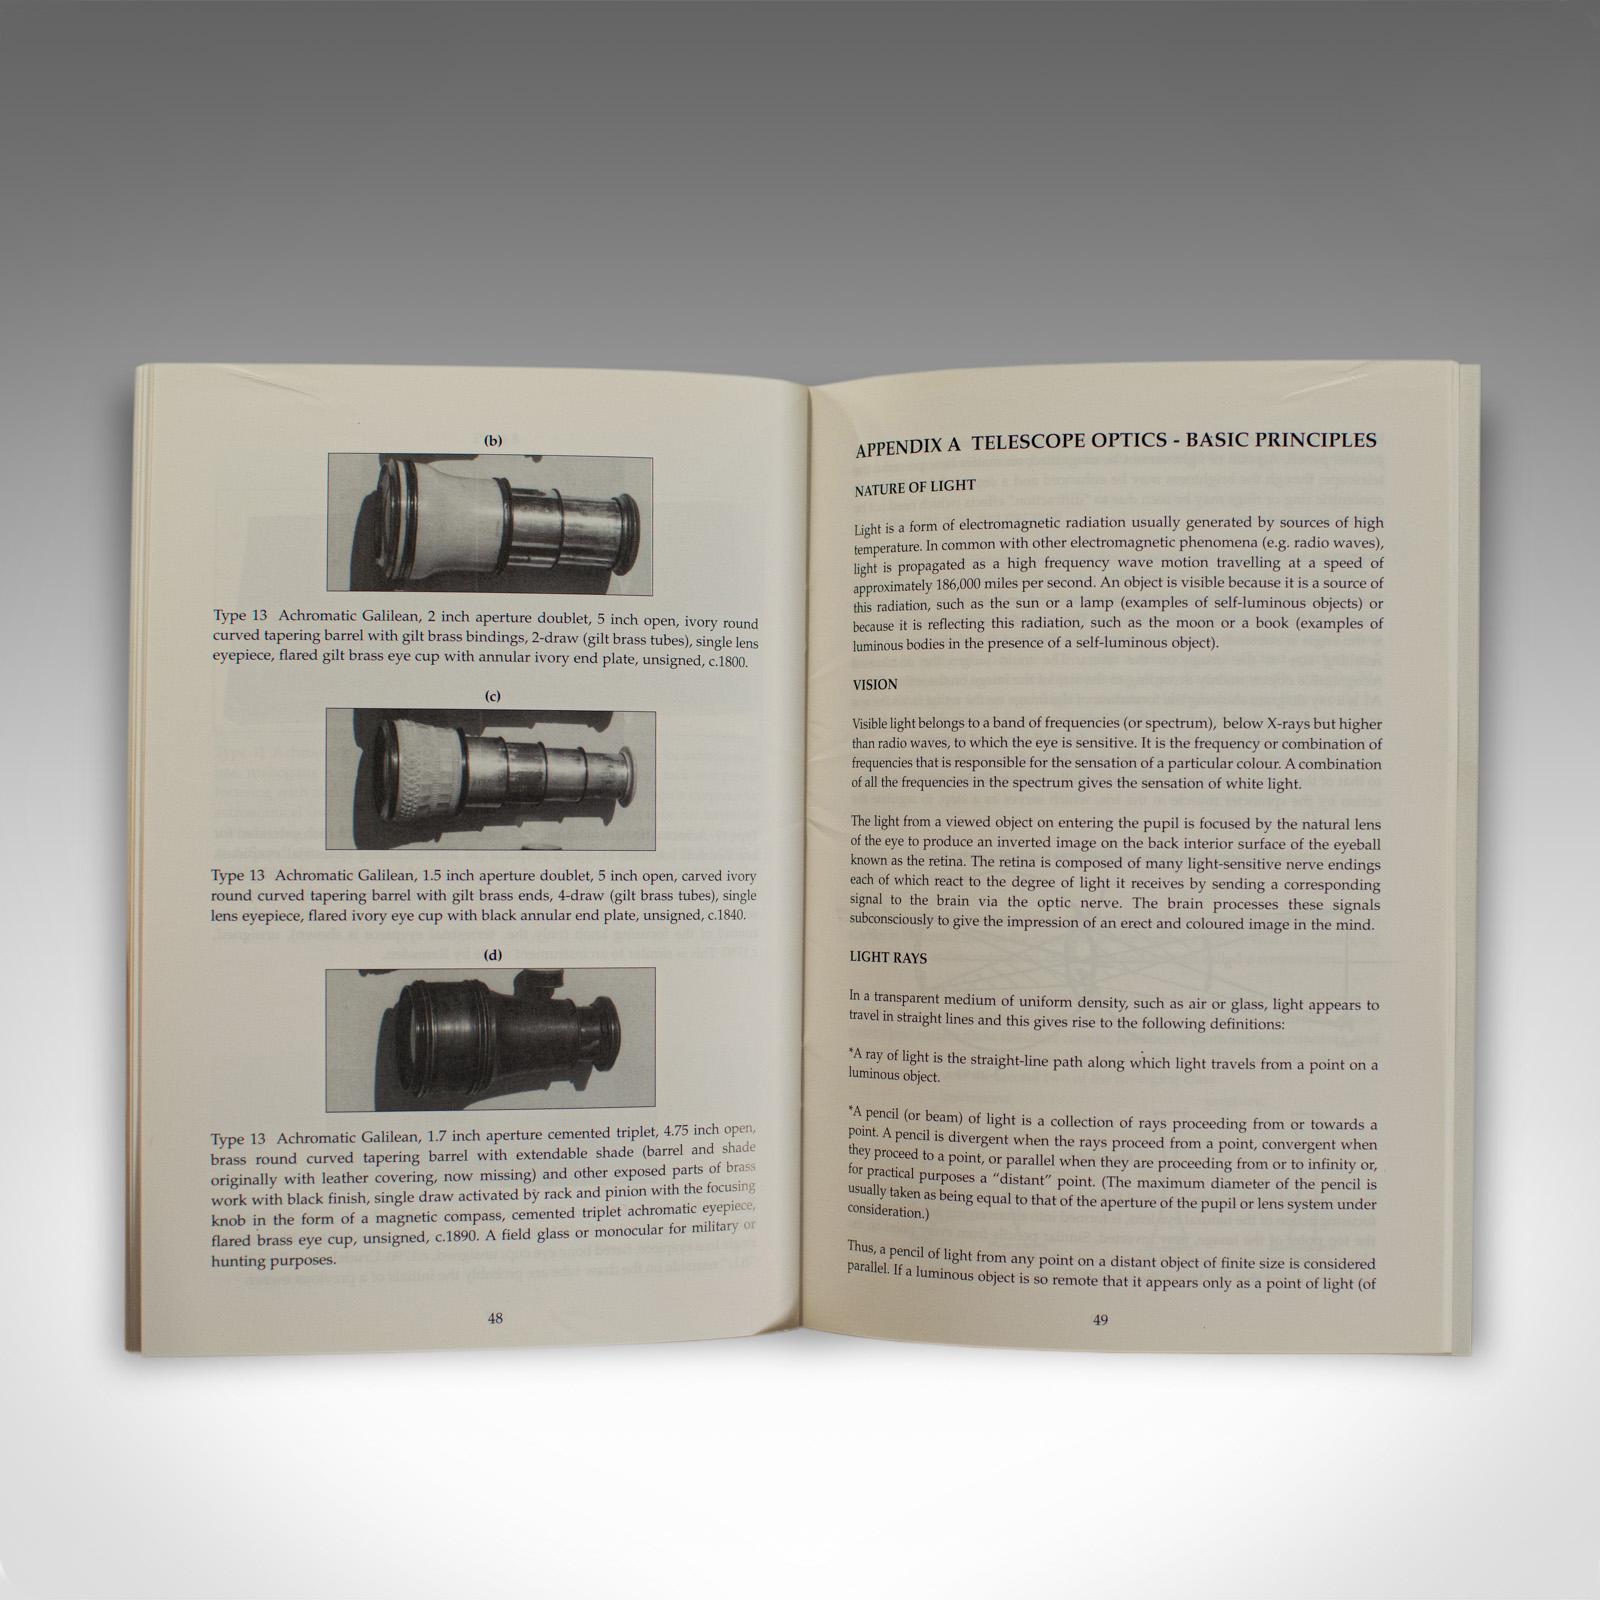 Paper Old Telescopes by Reginald J. Cheetham, Scientific Instrument Book December 1997 For Sale